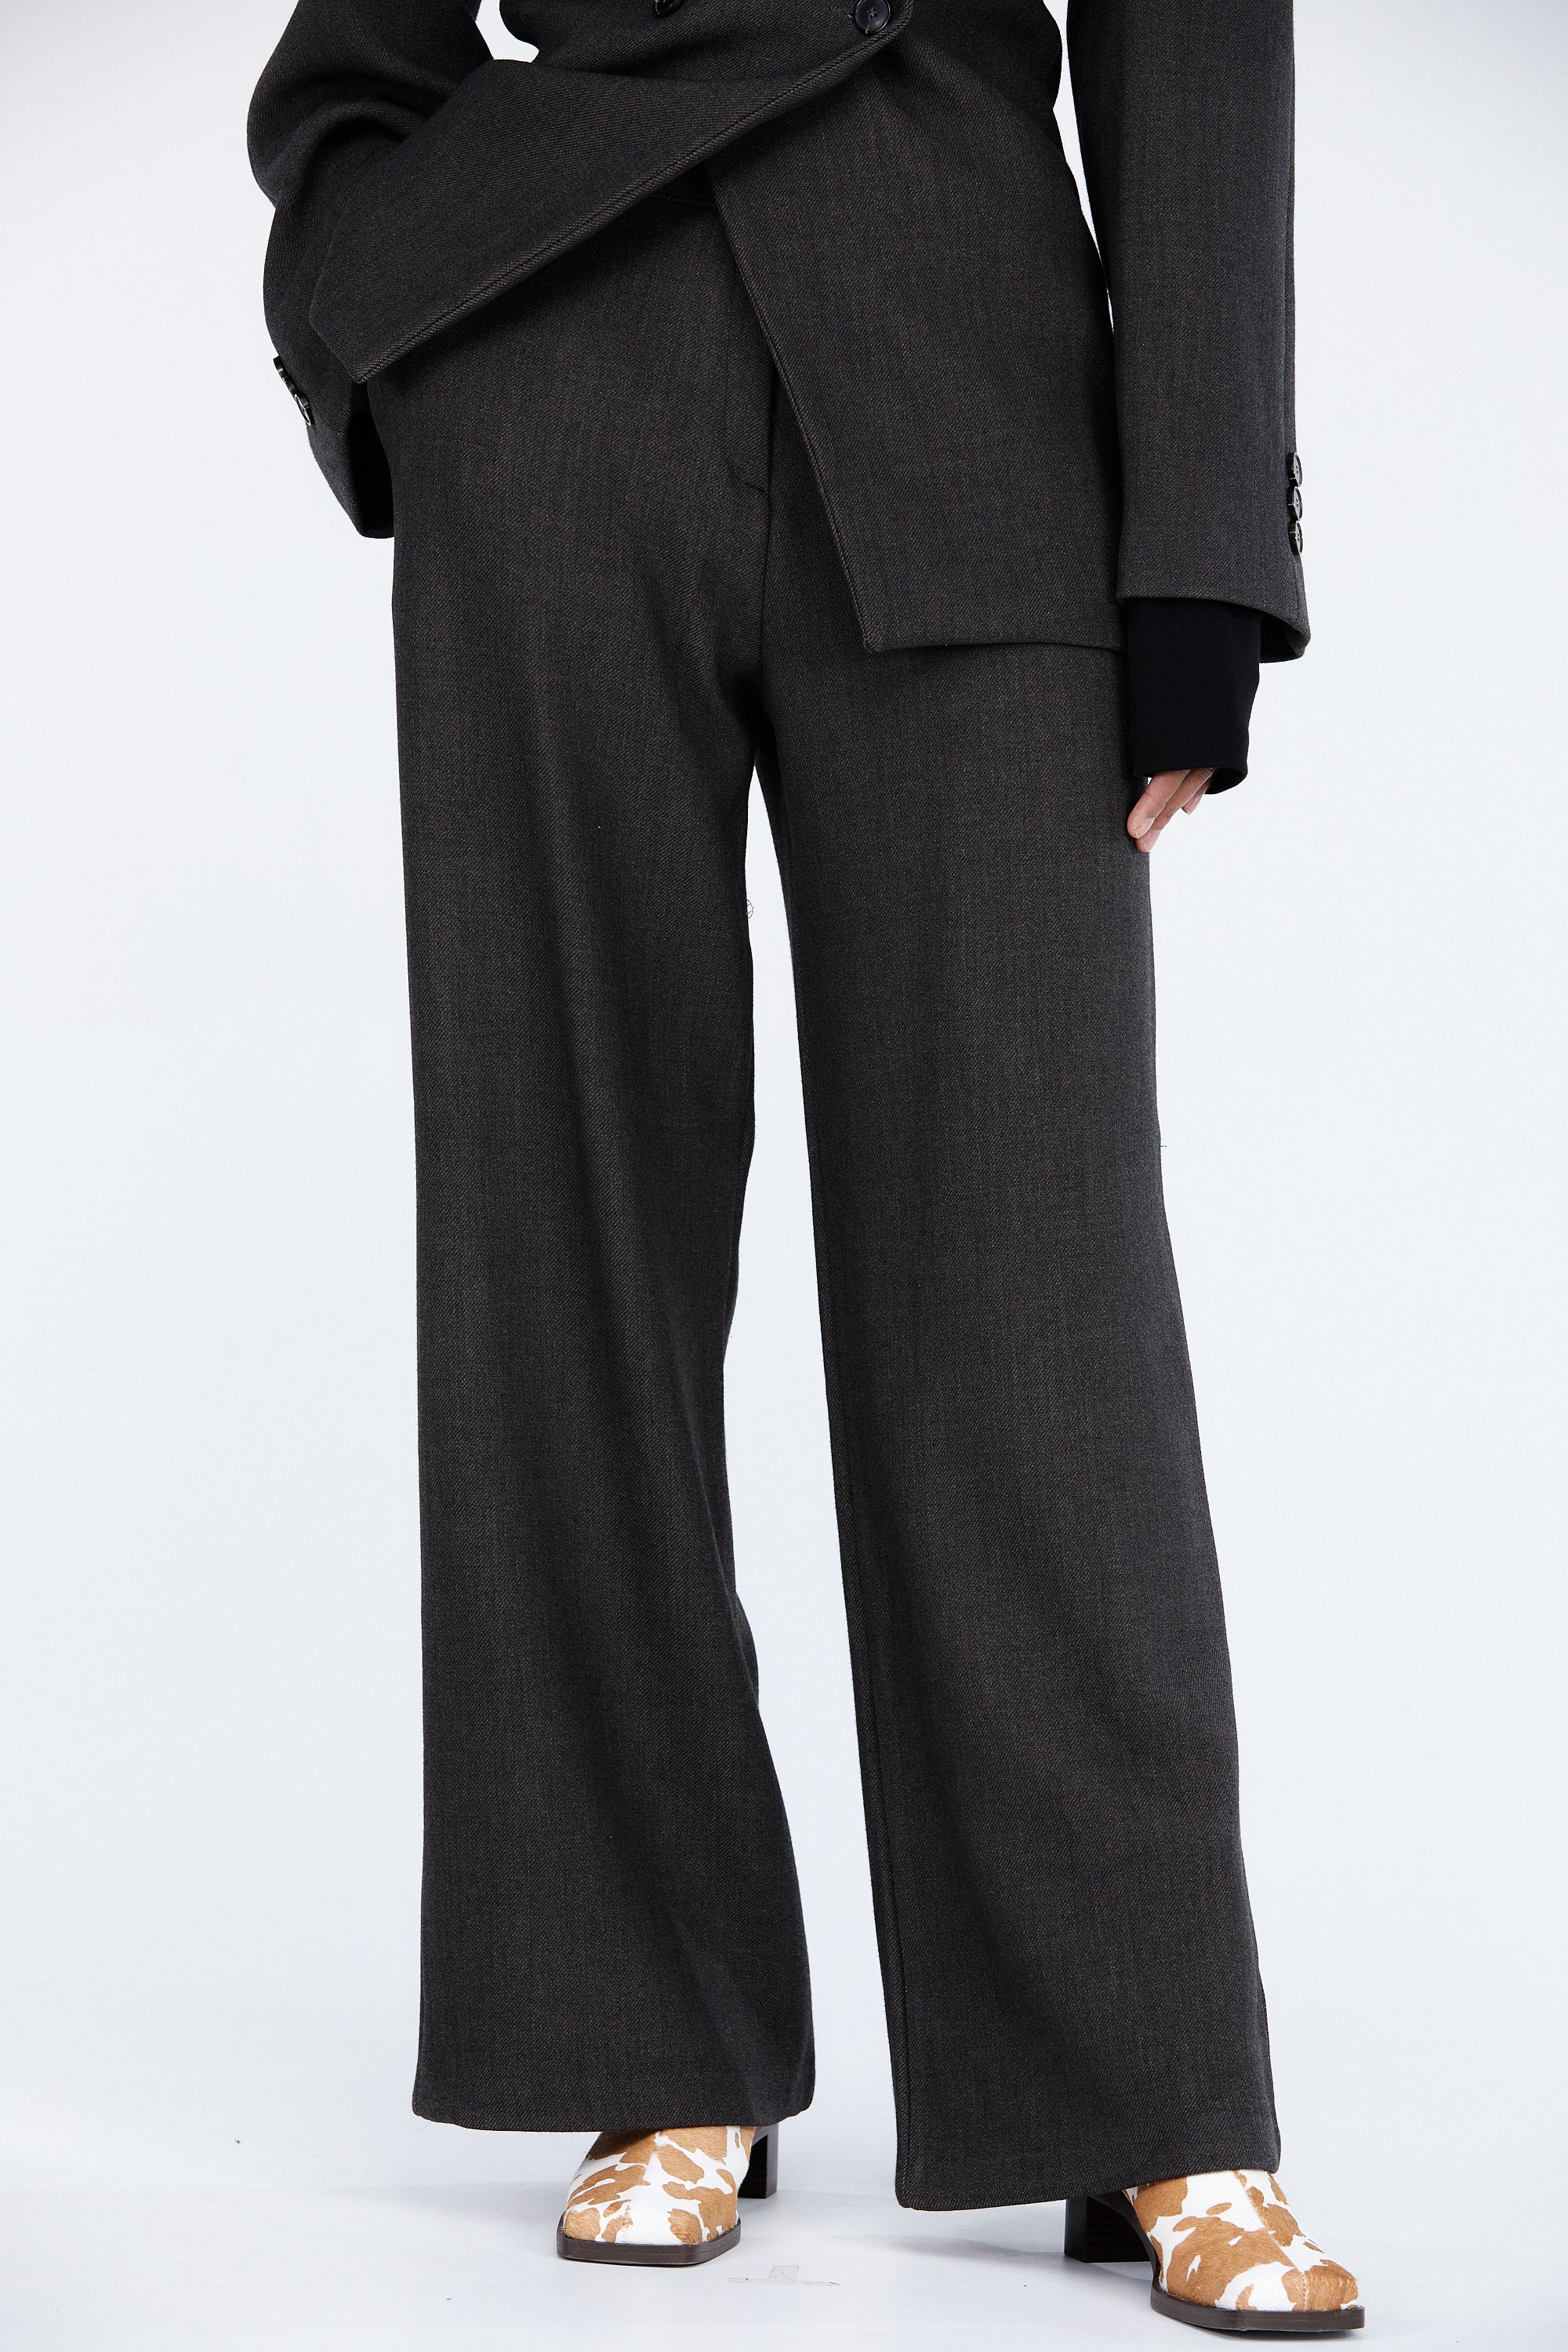 Grey wool suit trousers with pockets | The Kooples